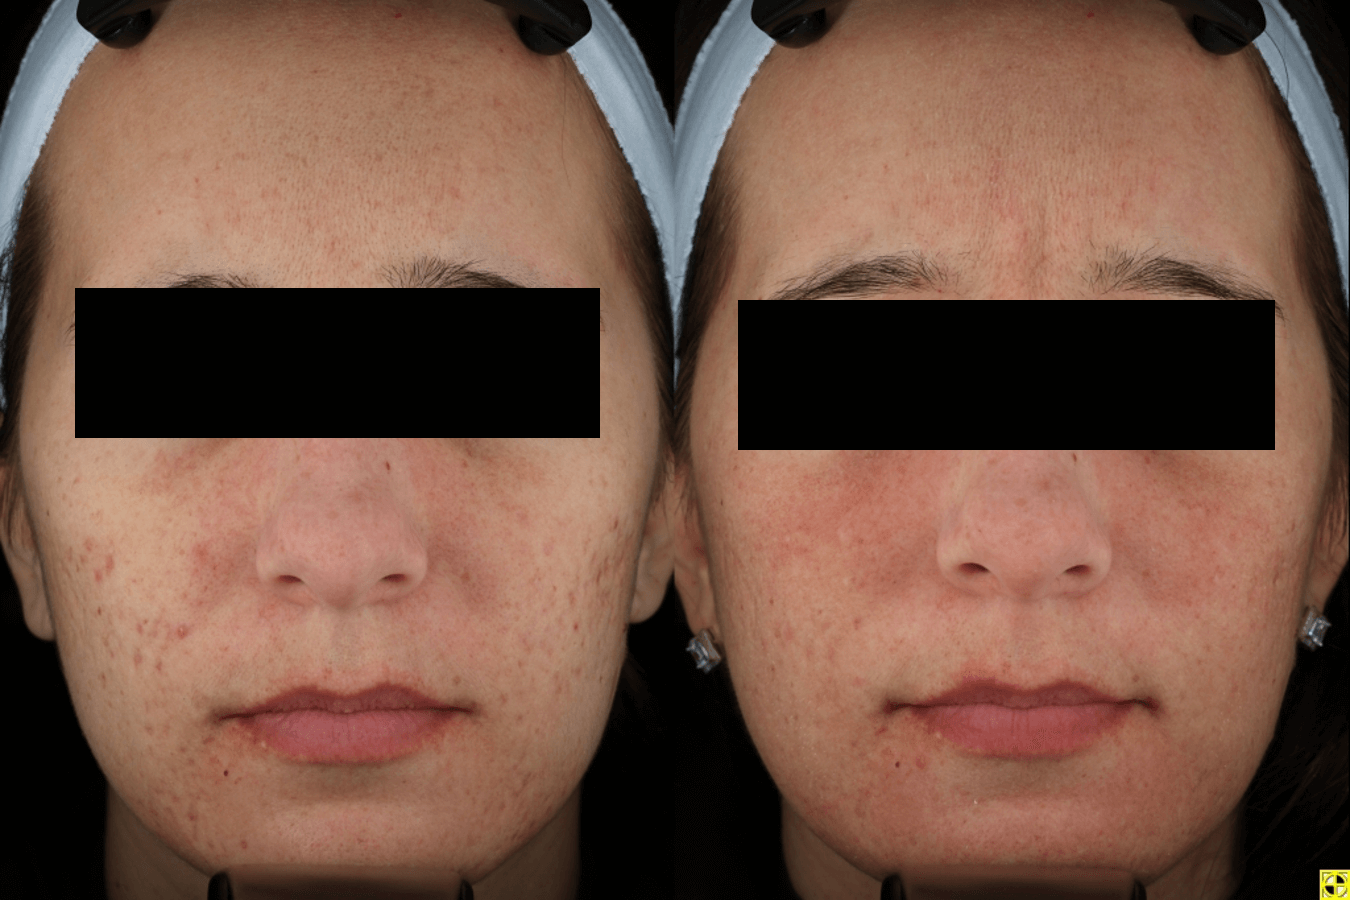 Acne Scaring Treatments Minneapolis *Results may vary per patient.